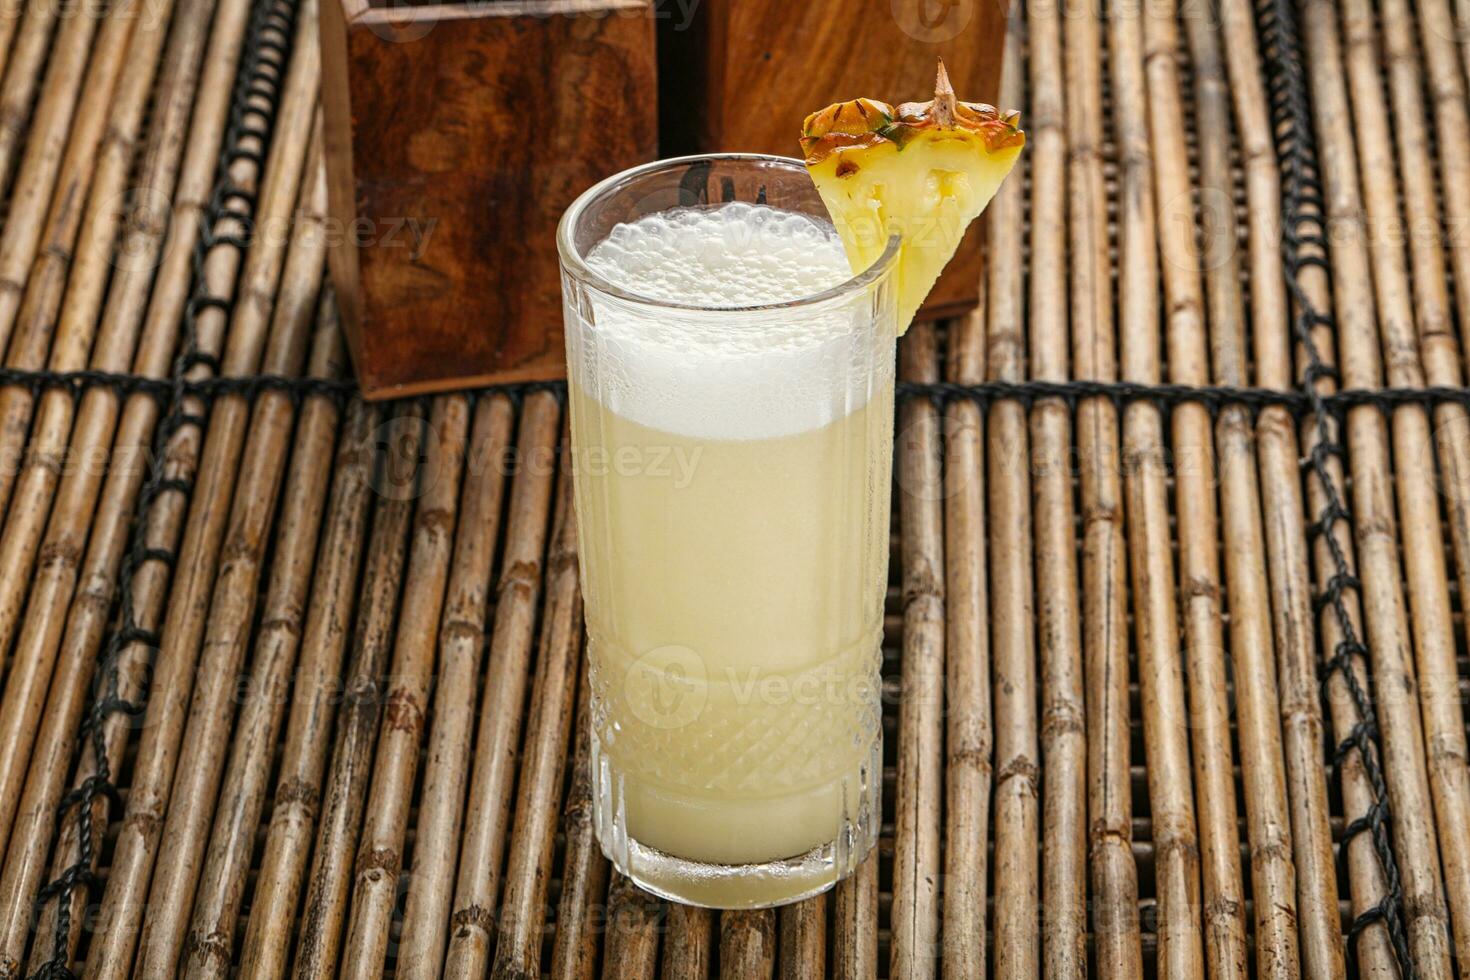 Pinacolada pineapple coctail with juice photo